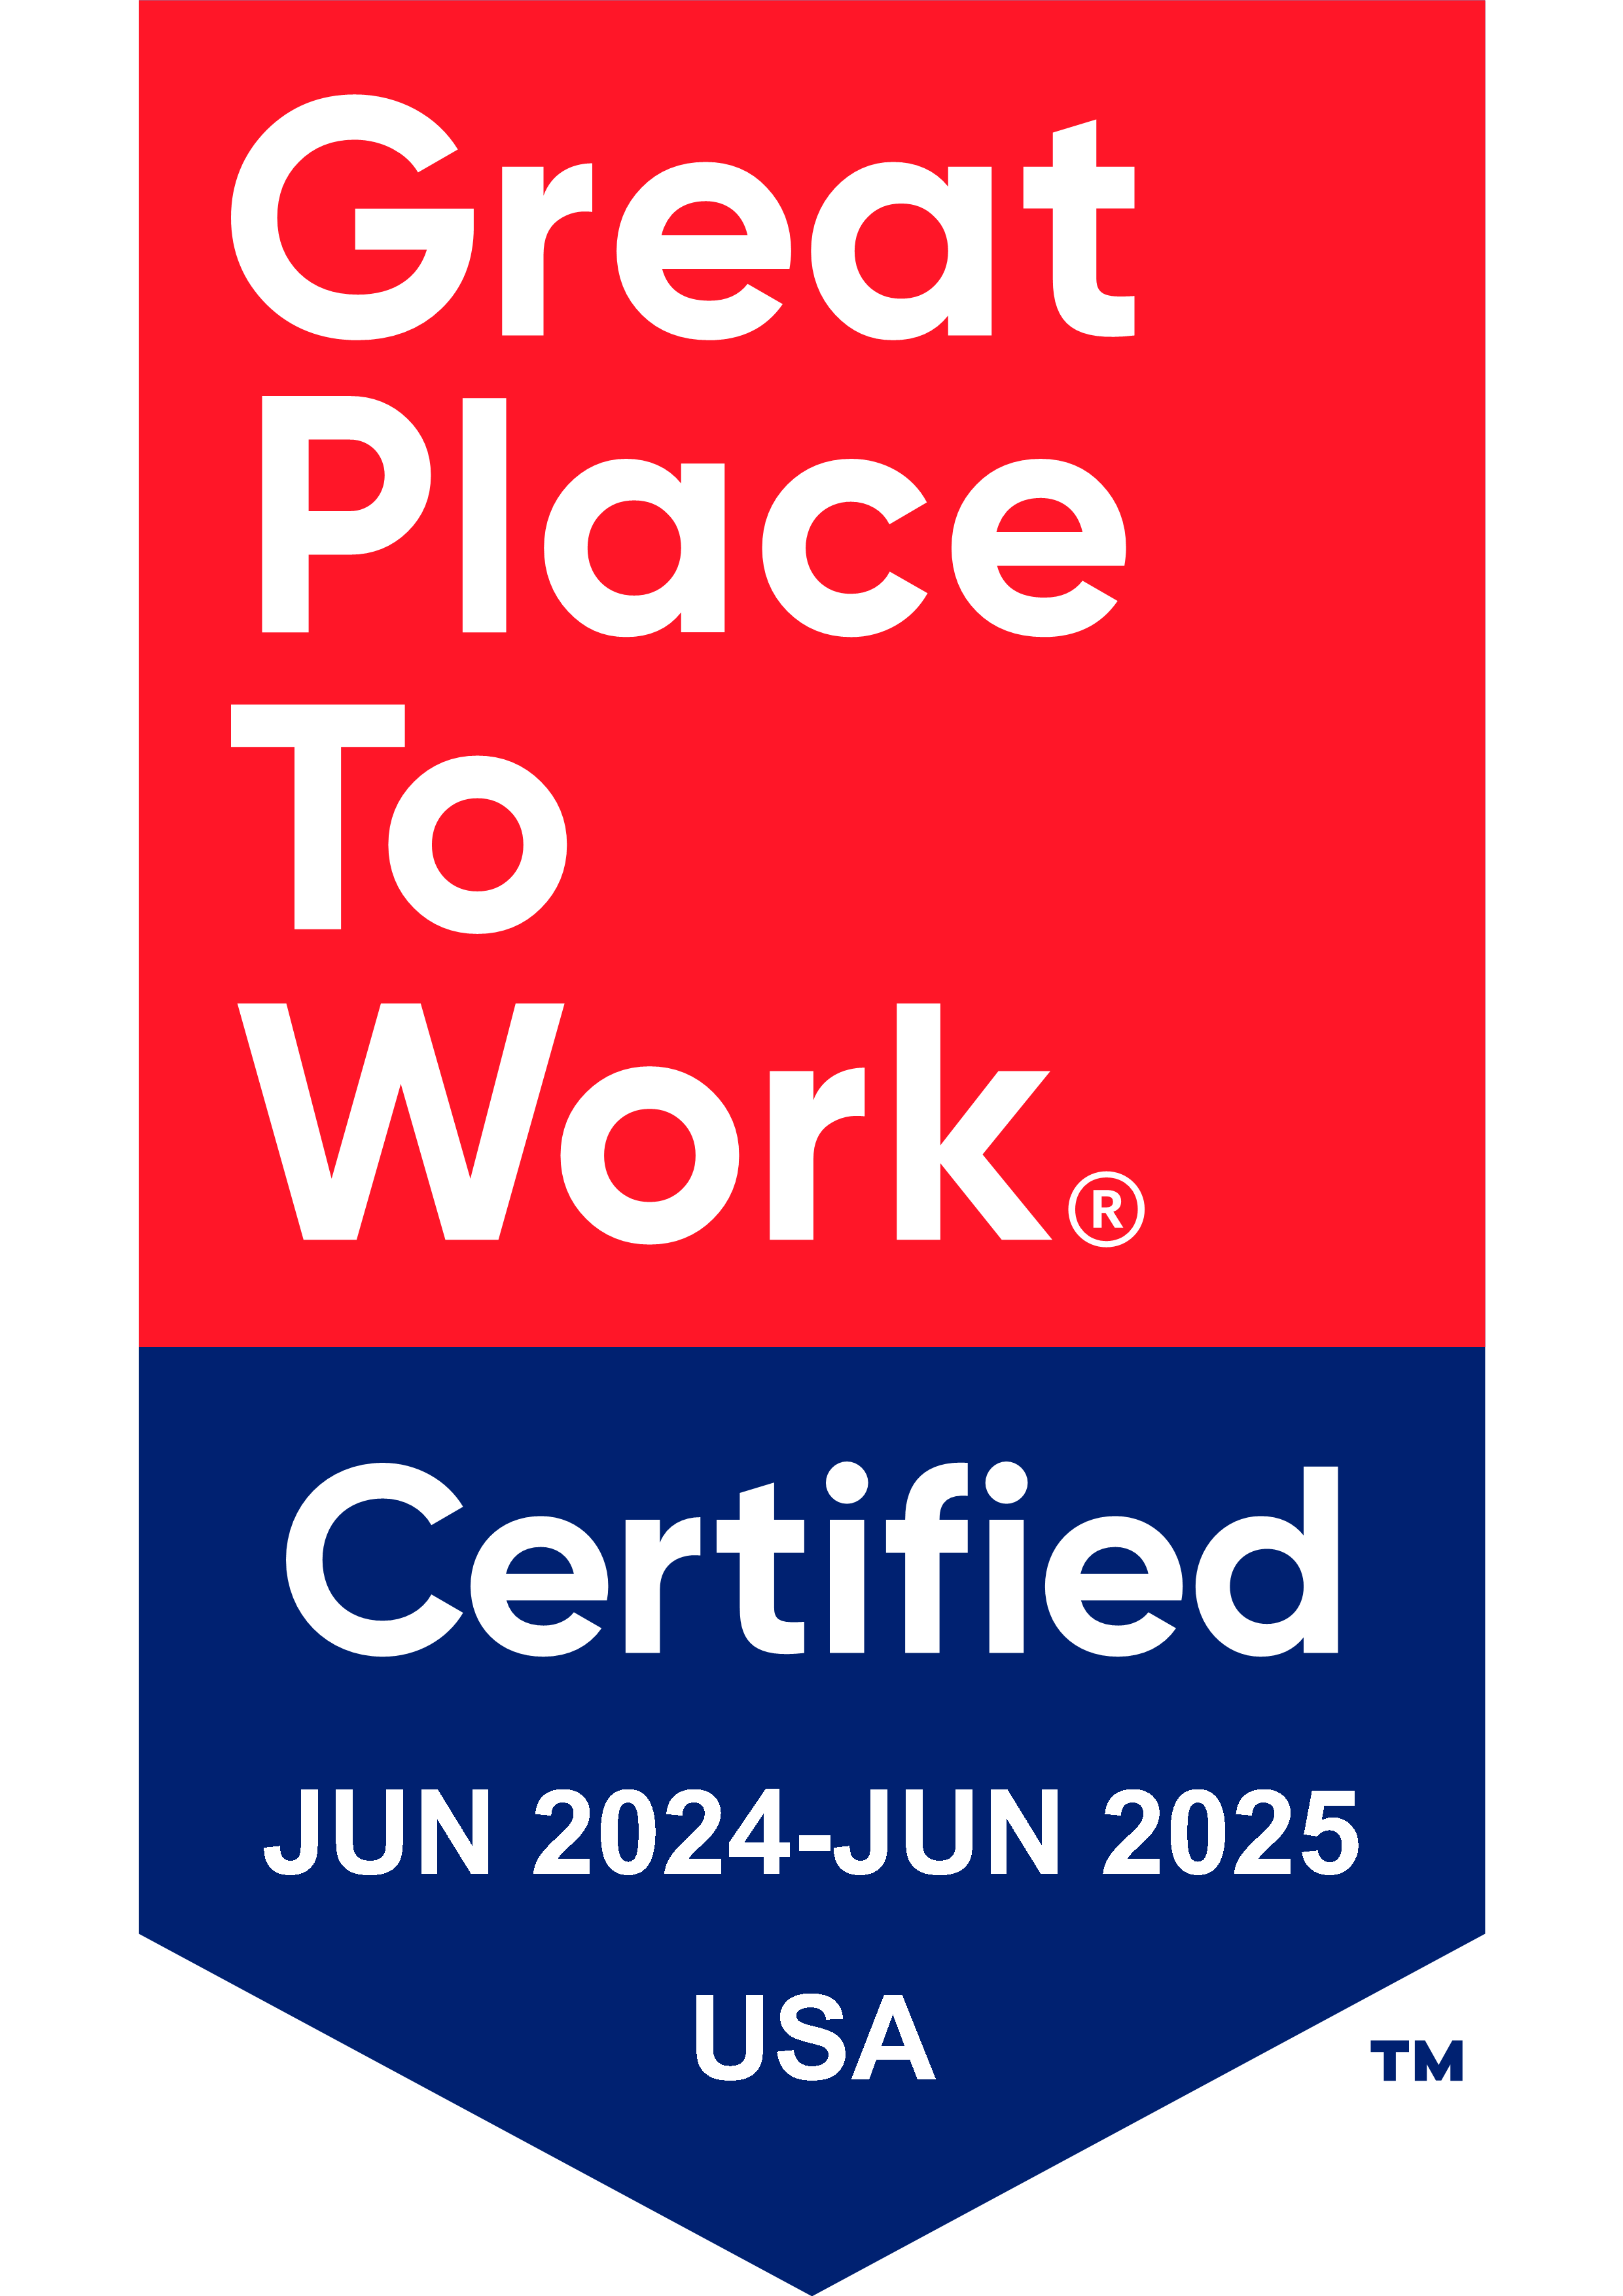 Peckham is certified as a Great Place to Work.